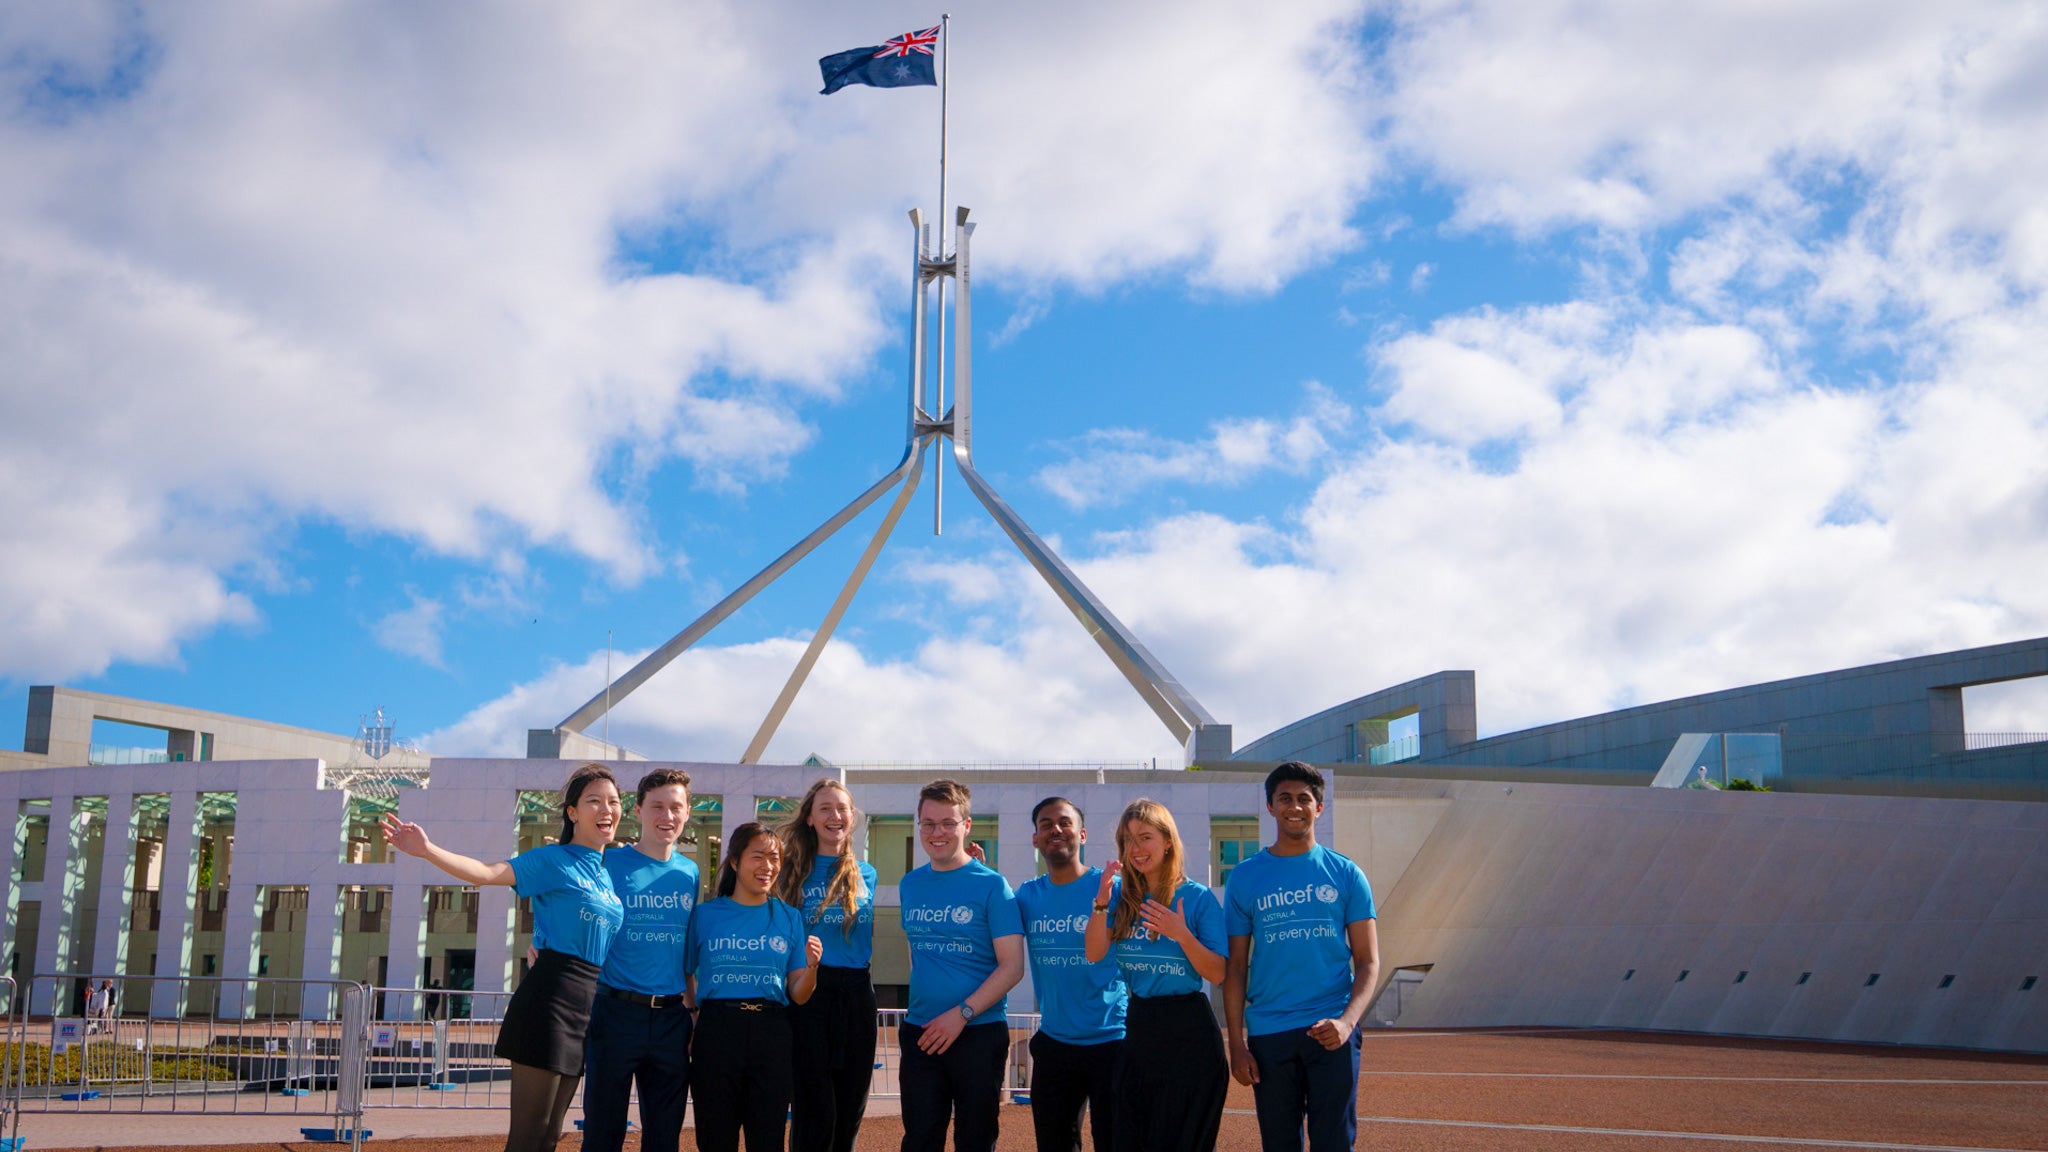 Young Ambassador's walk the halls of Parliament, meeting politicians, to voice what matters to children and young people accross Australia.  